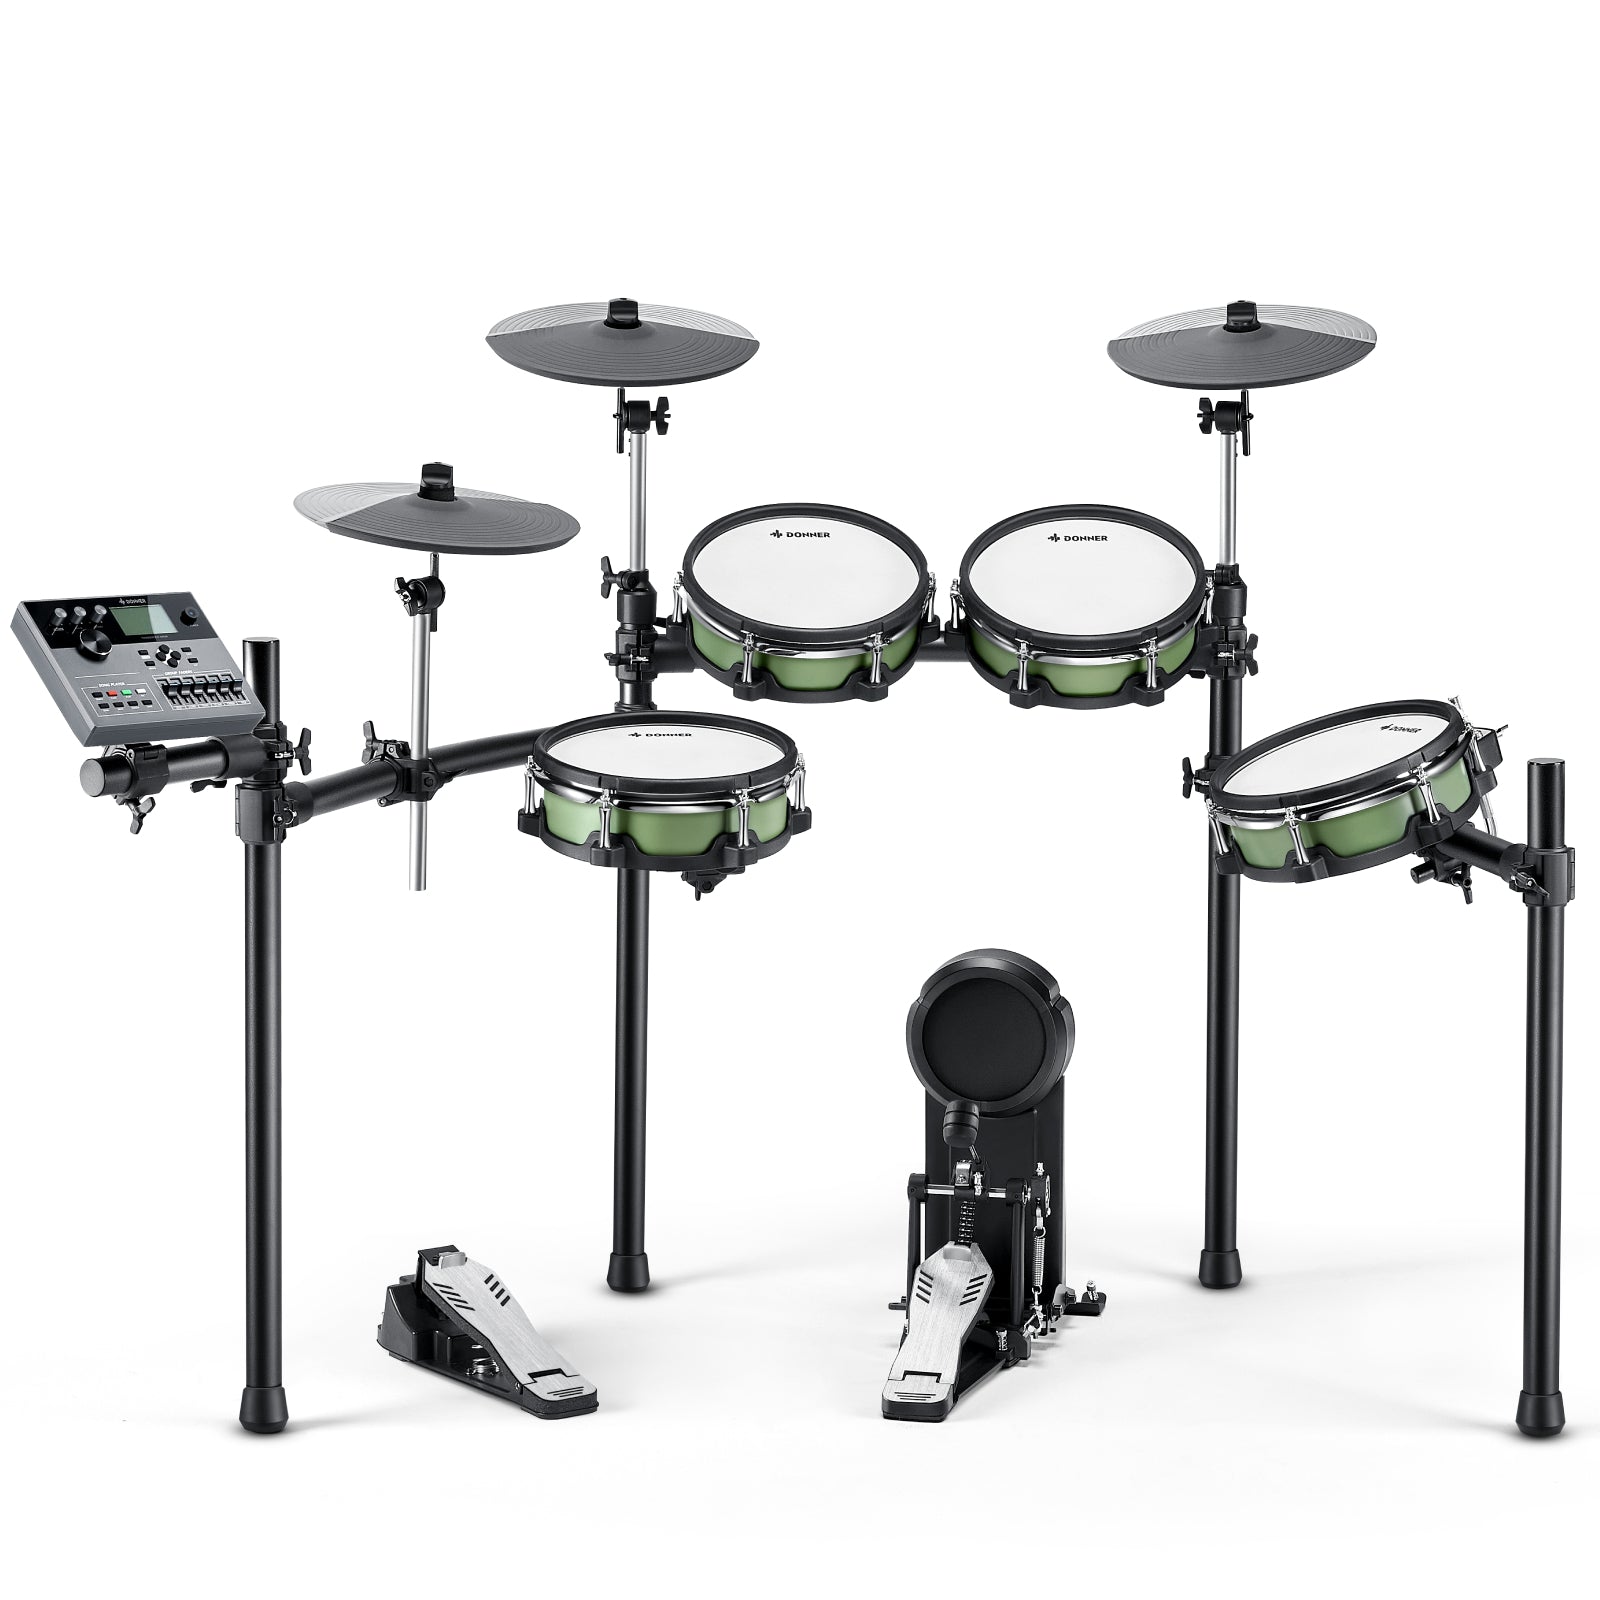 

Donner DED-500 Electronic Drum Set 5-Drum 3-Cymbal with Standard Mesh Heads/Included BD Pedal